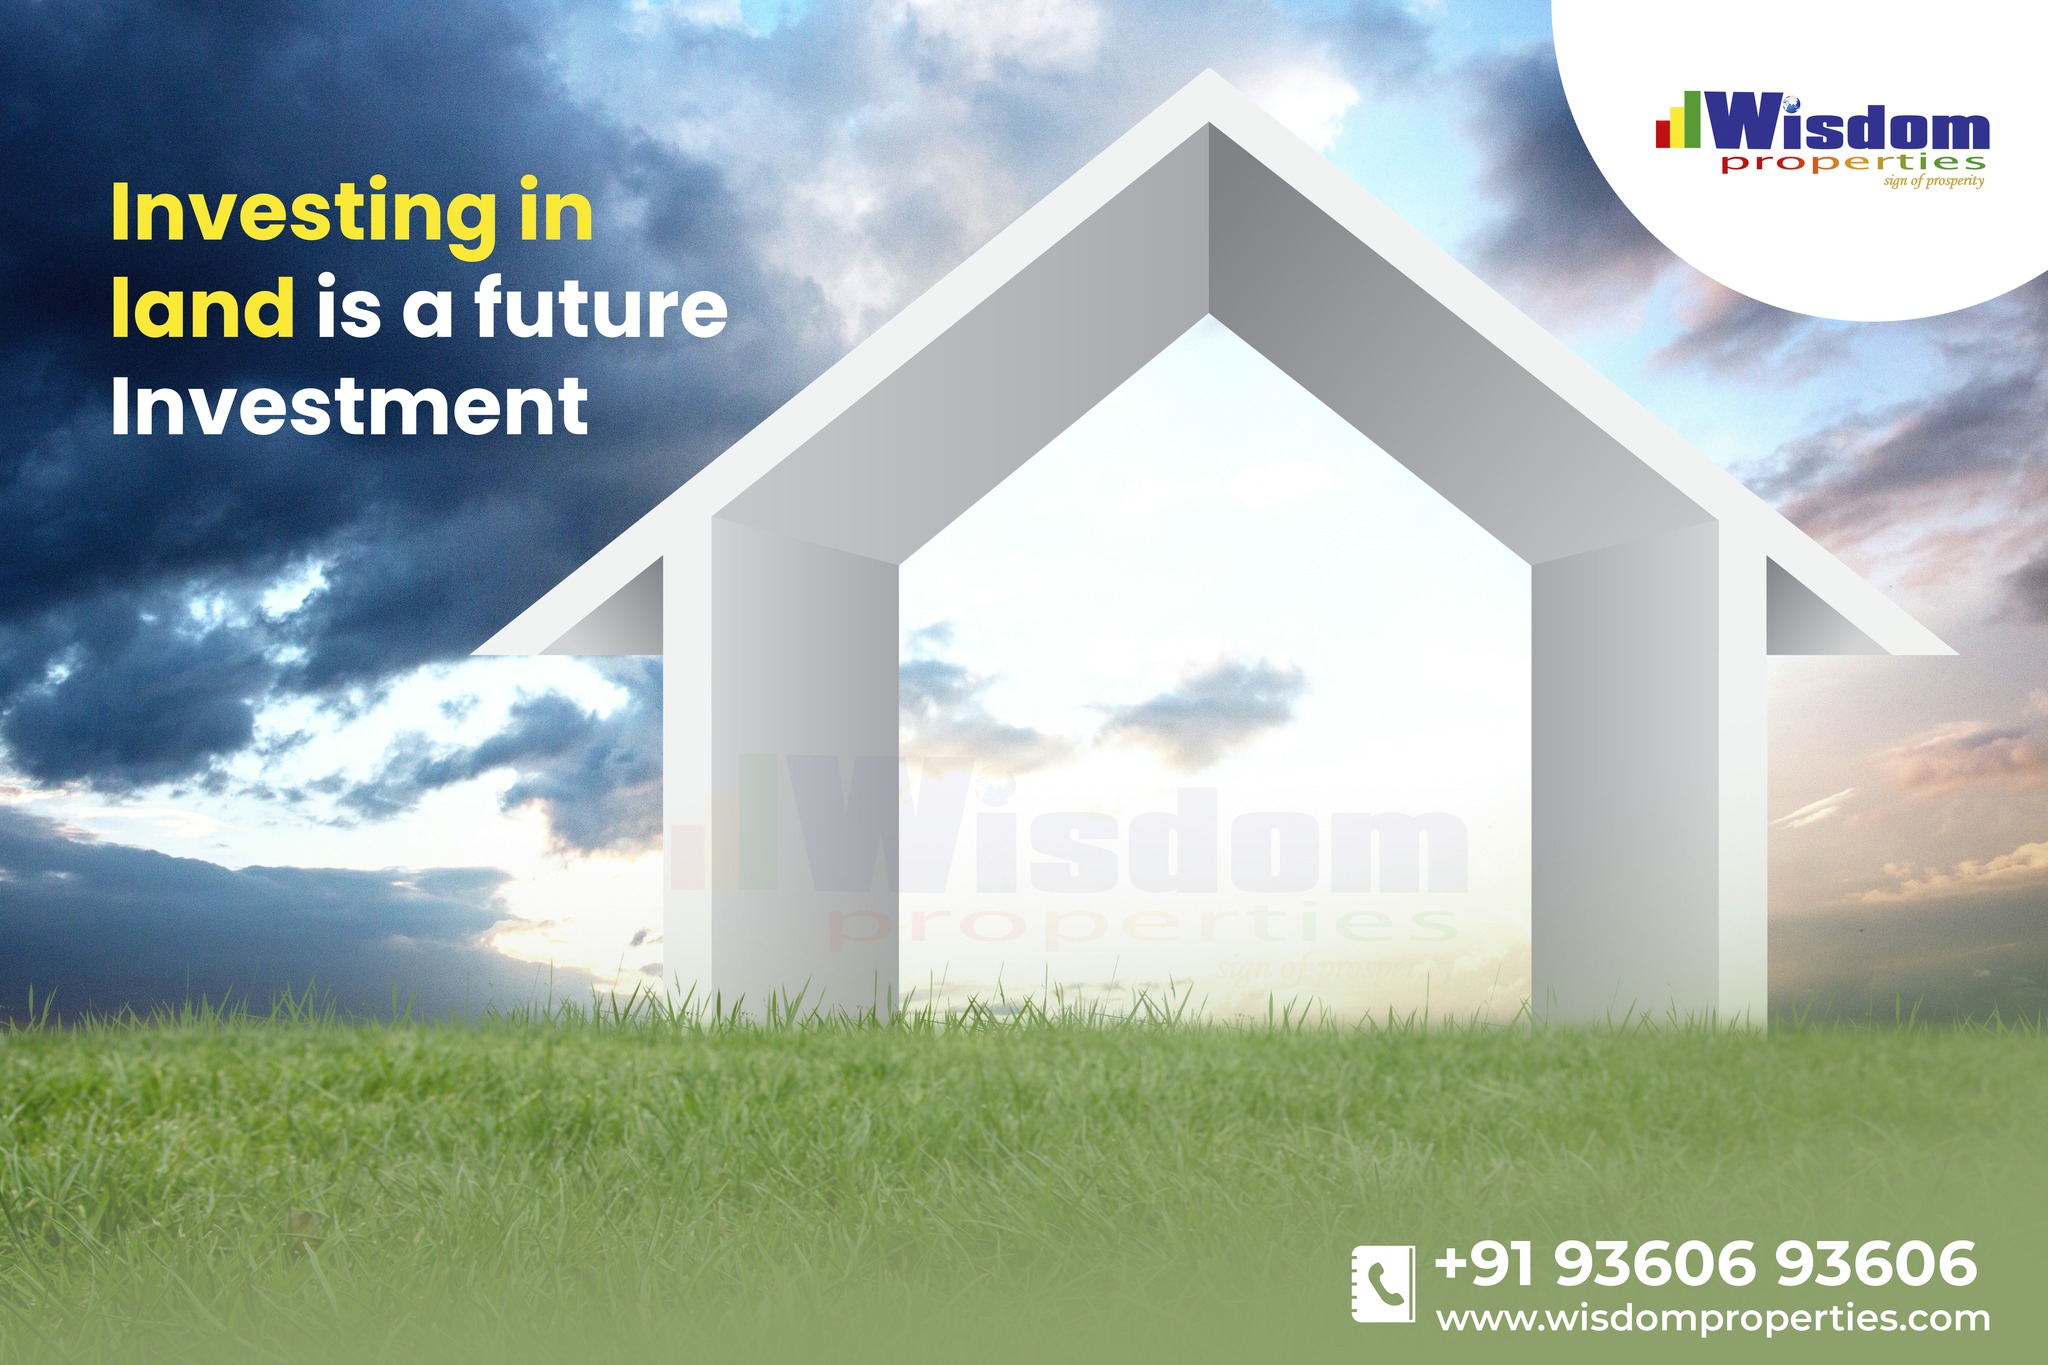 Buying land is a good investment in context with a future perspective